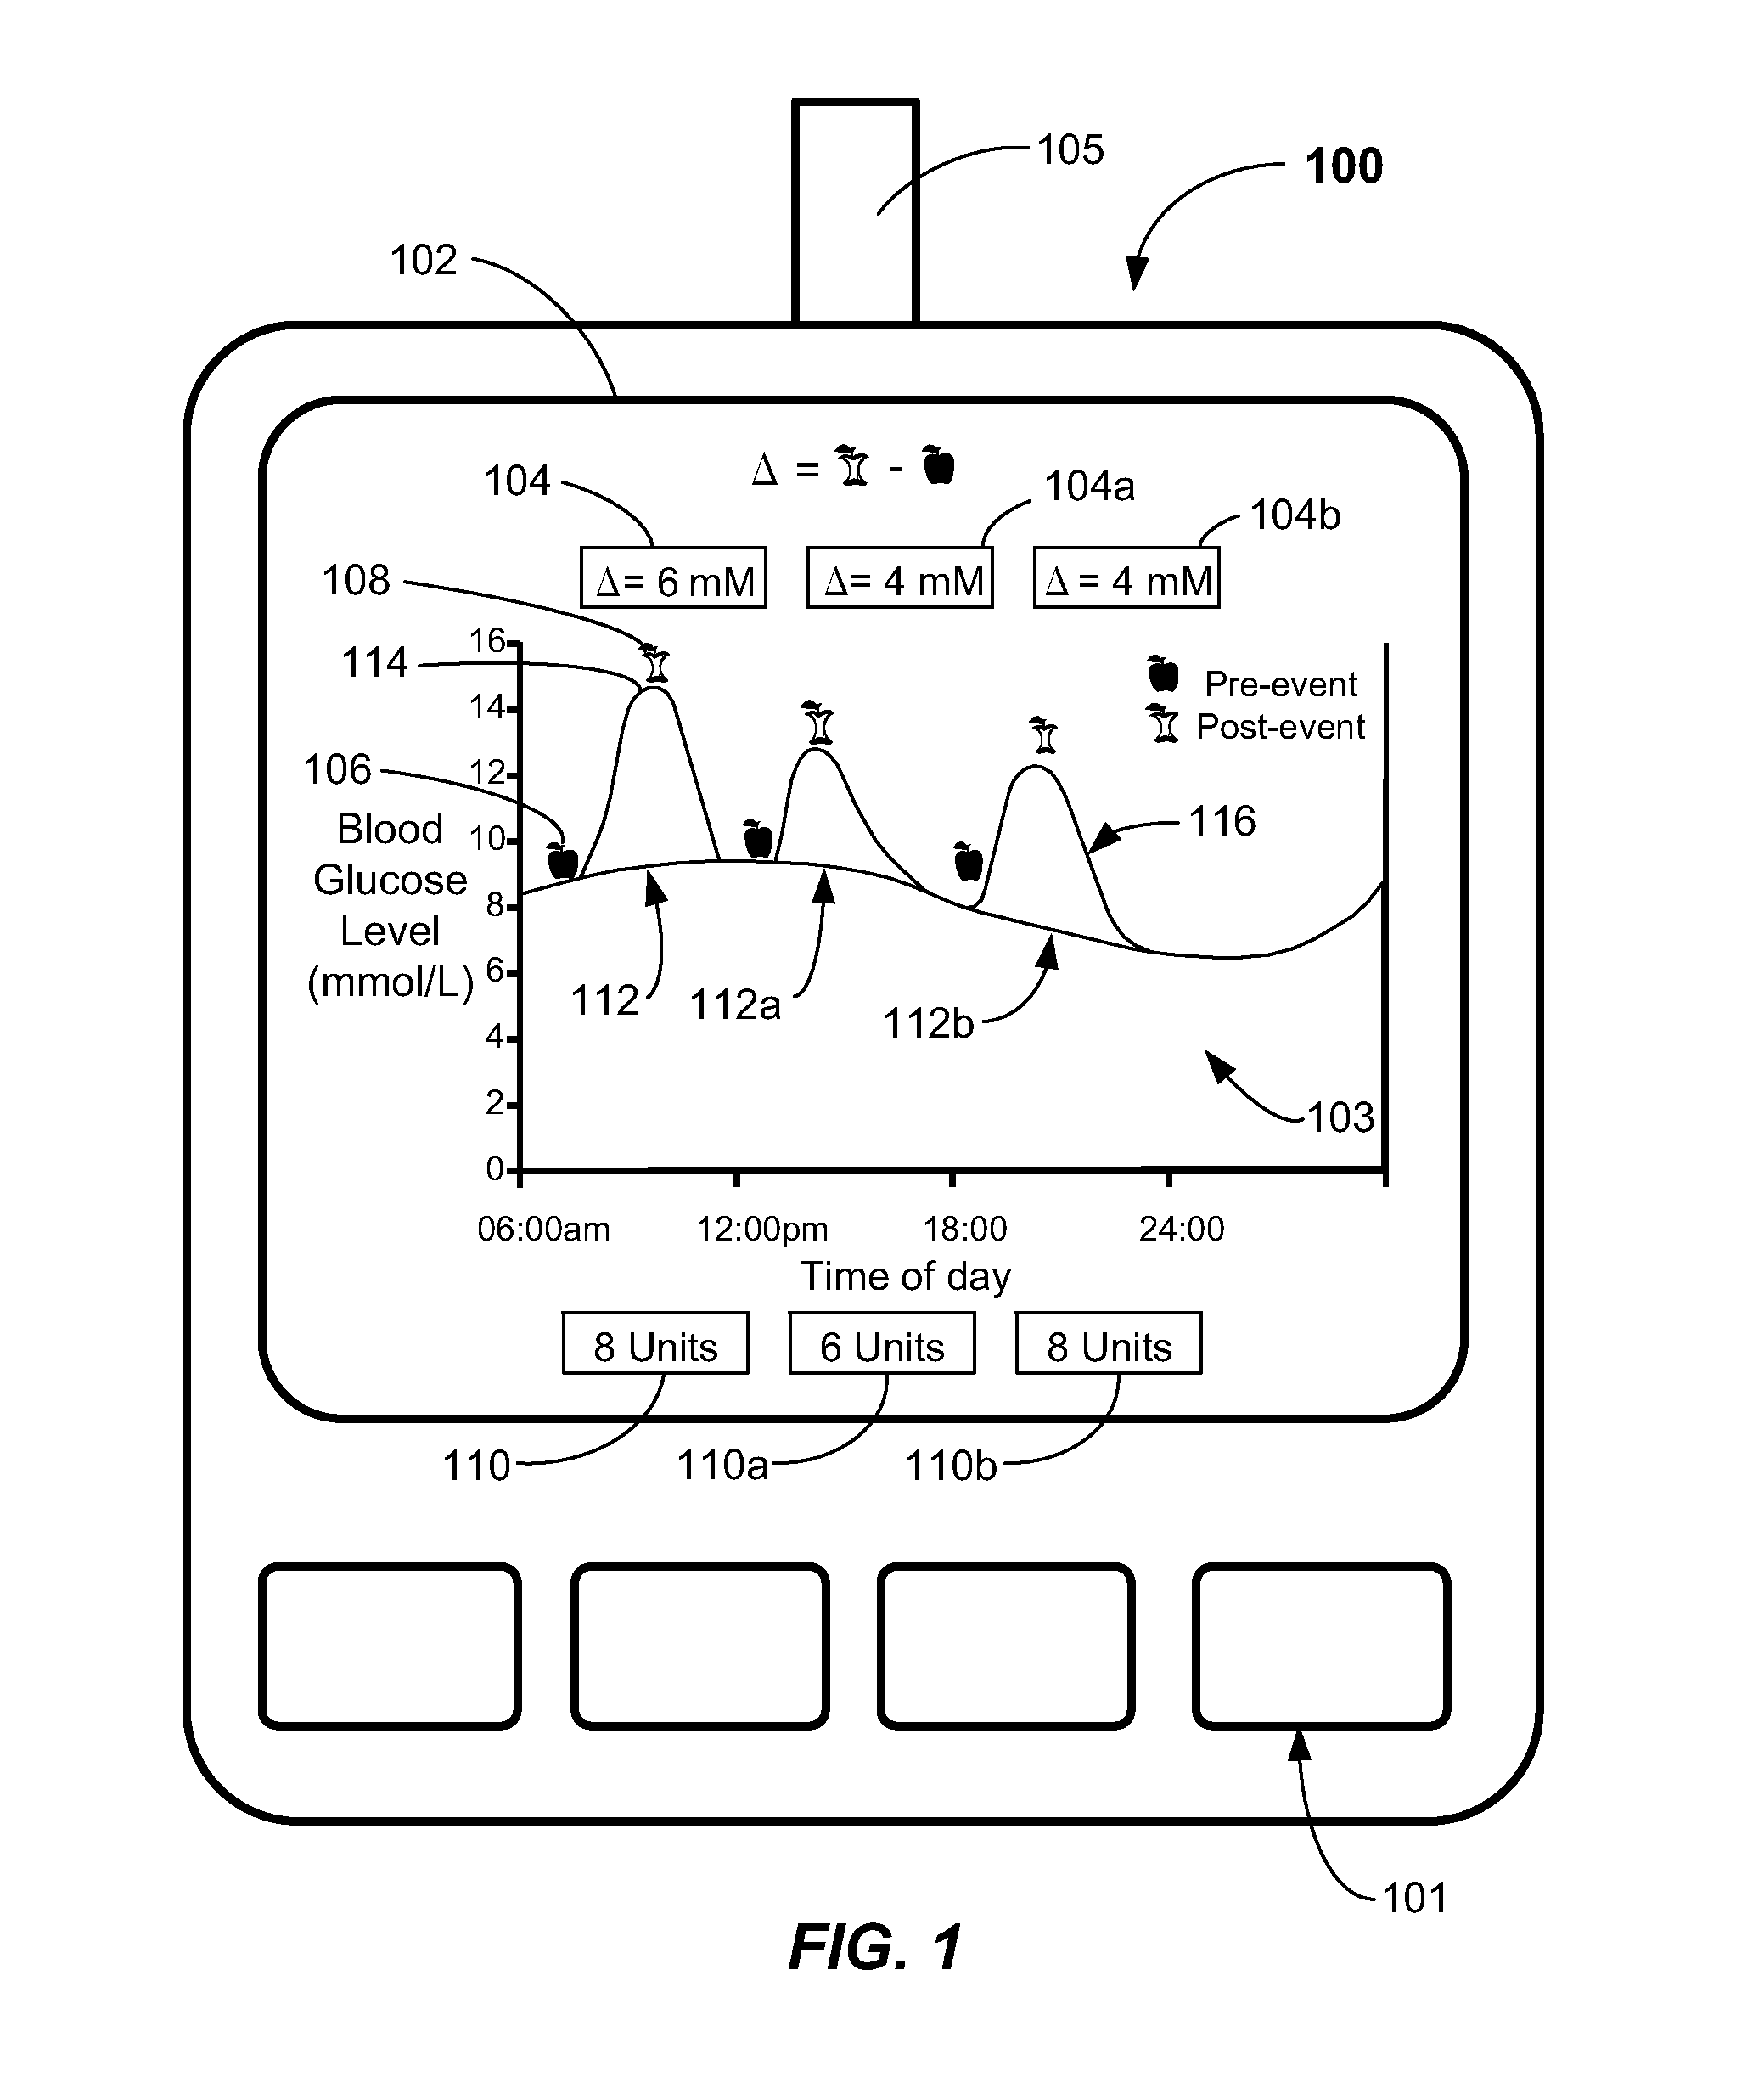 Apparatus, systems and methods for determining and displaying pre-event and post-event analyte concentration levels